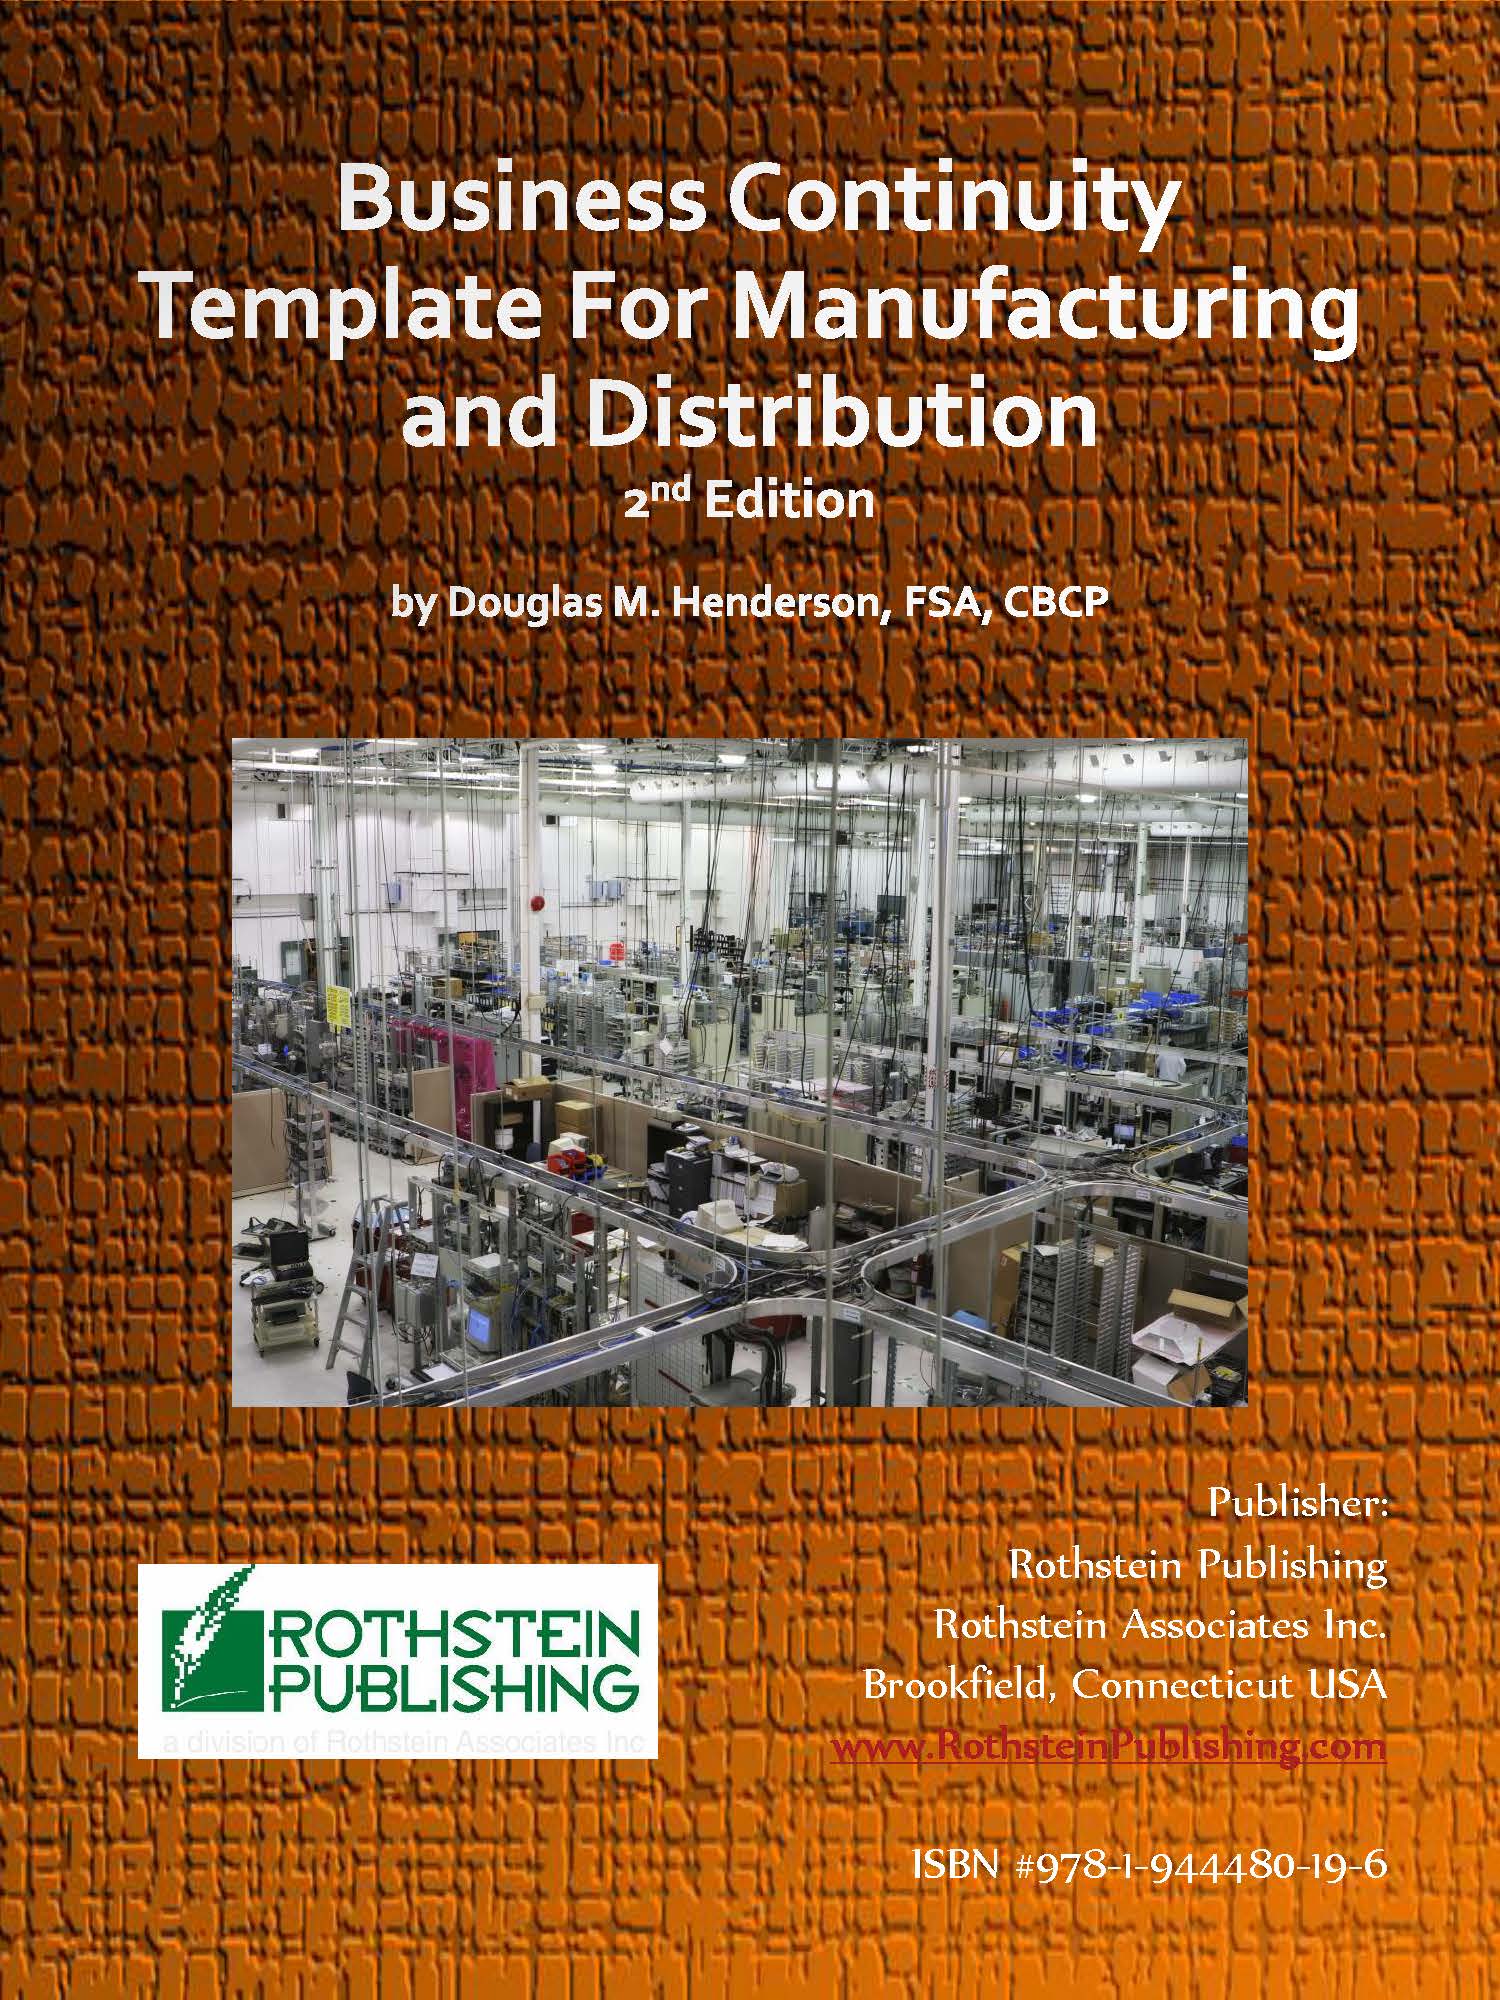 business-continuity-template-for-manufacturing-and-distribution-by-douglas-m-henderson-rothstein-pubishing